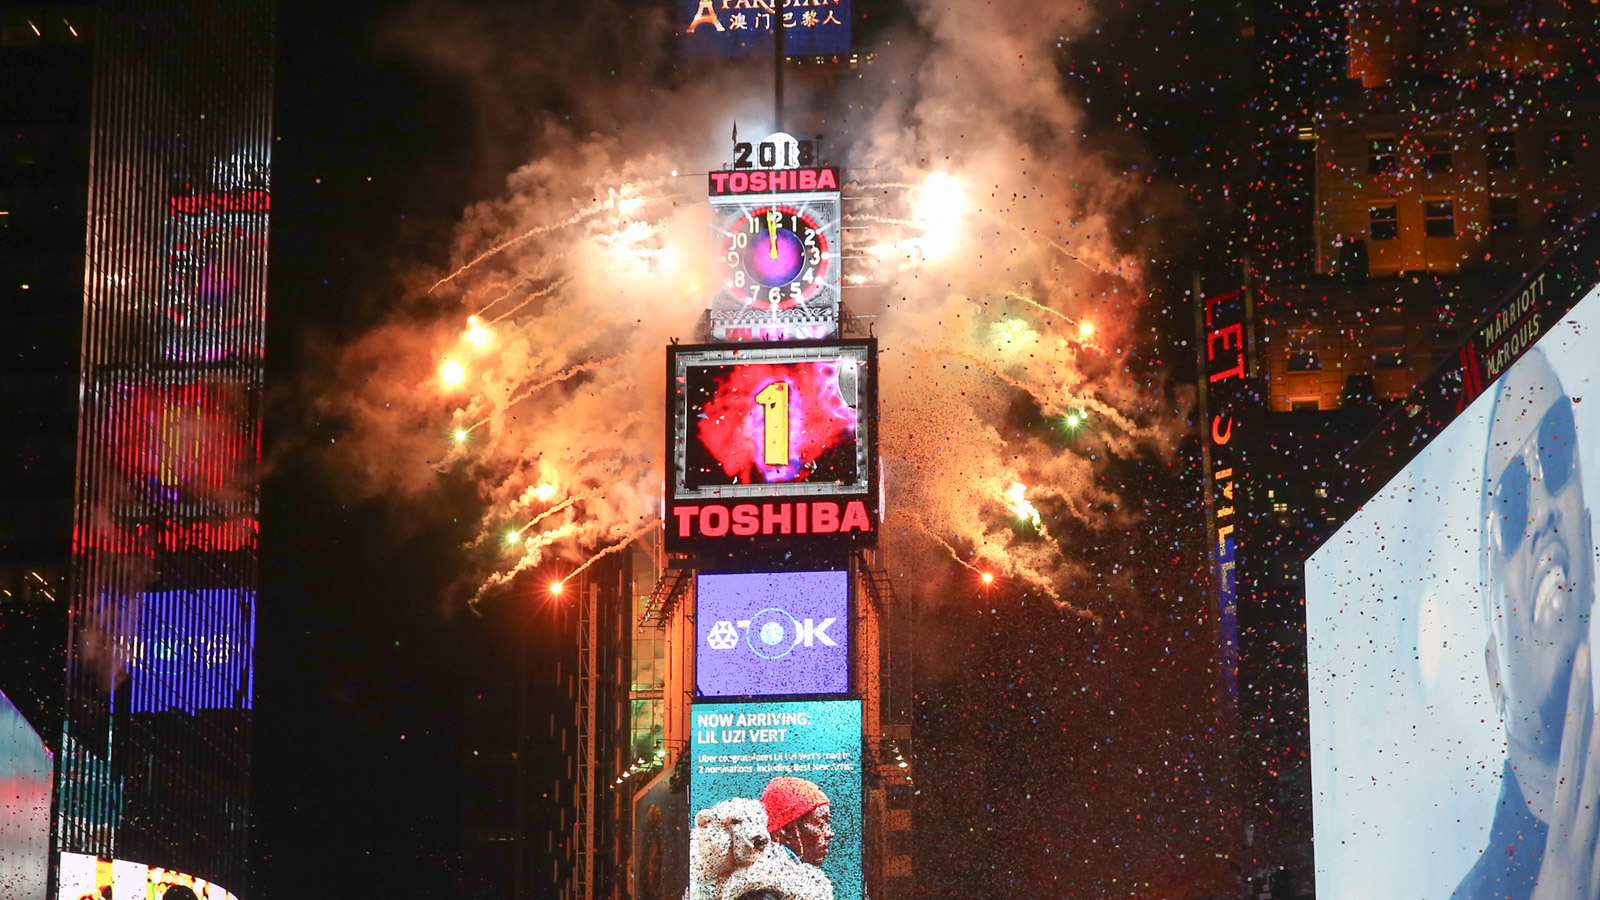 The ball drops during the New Year's Eve celebration in Times Square